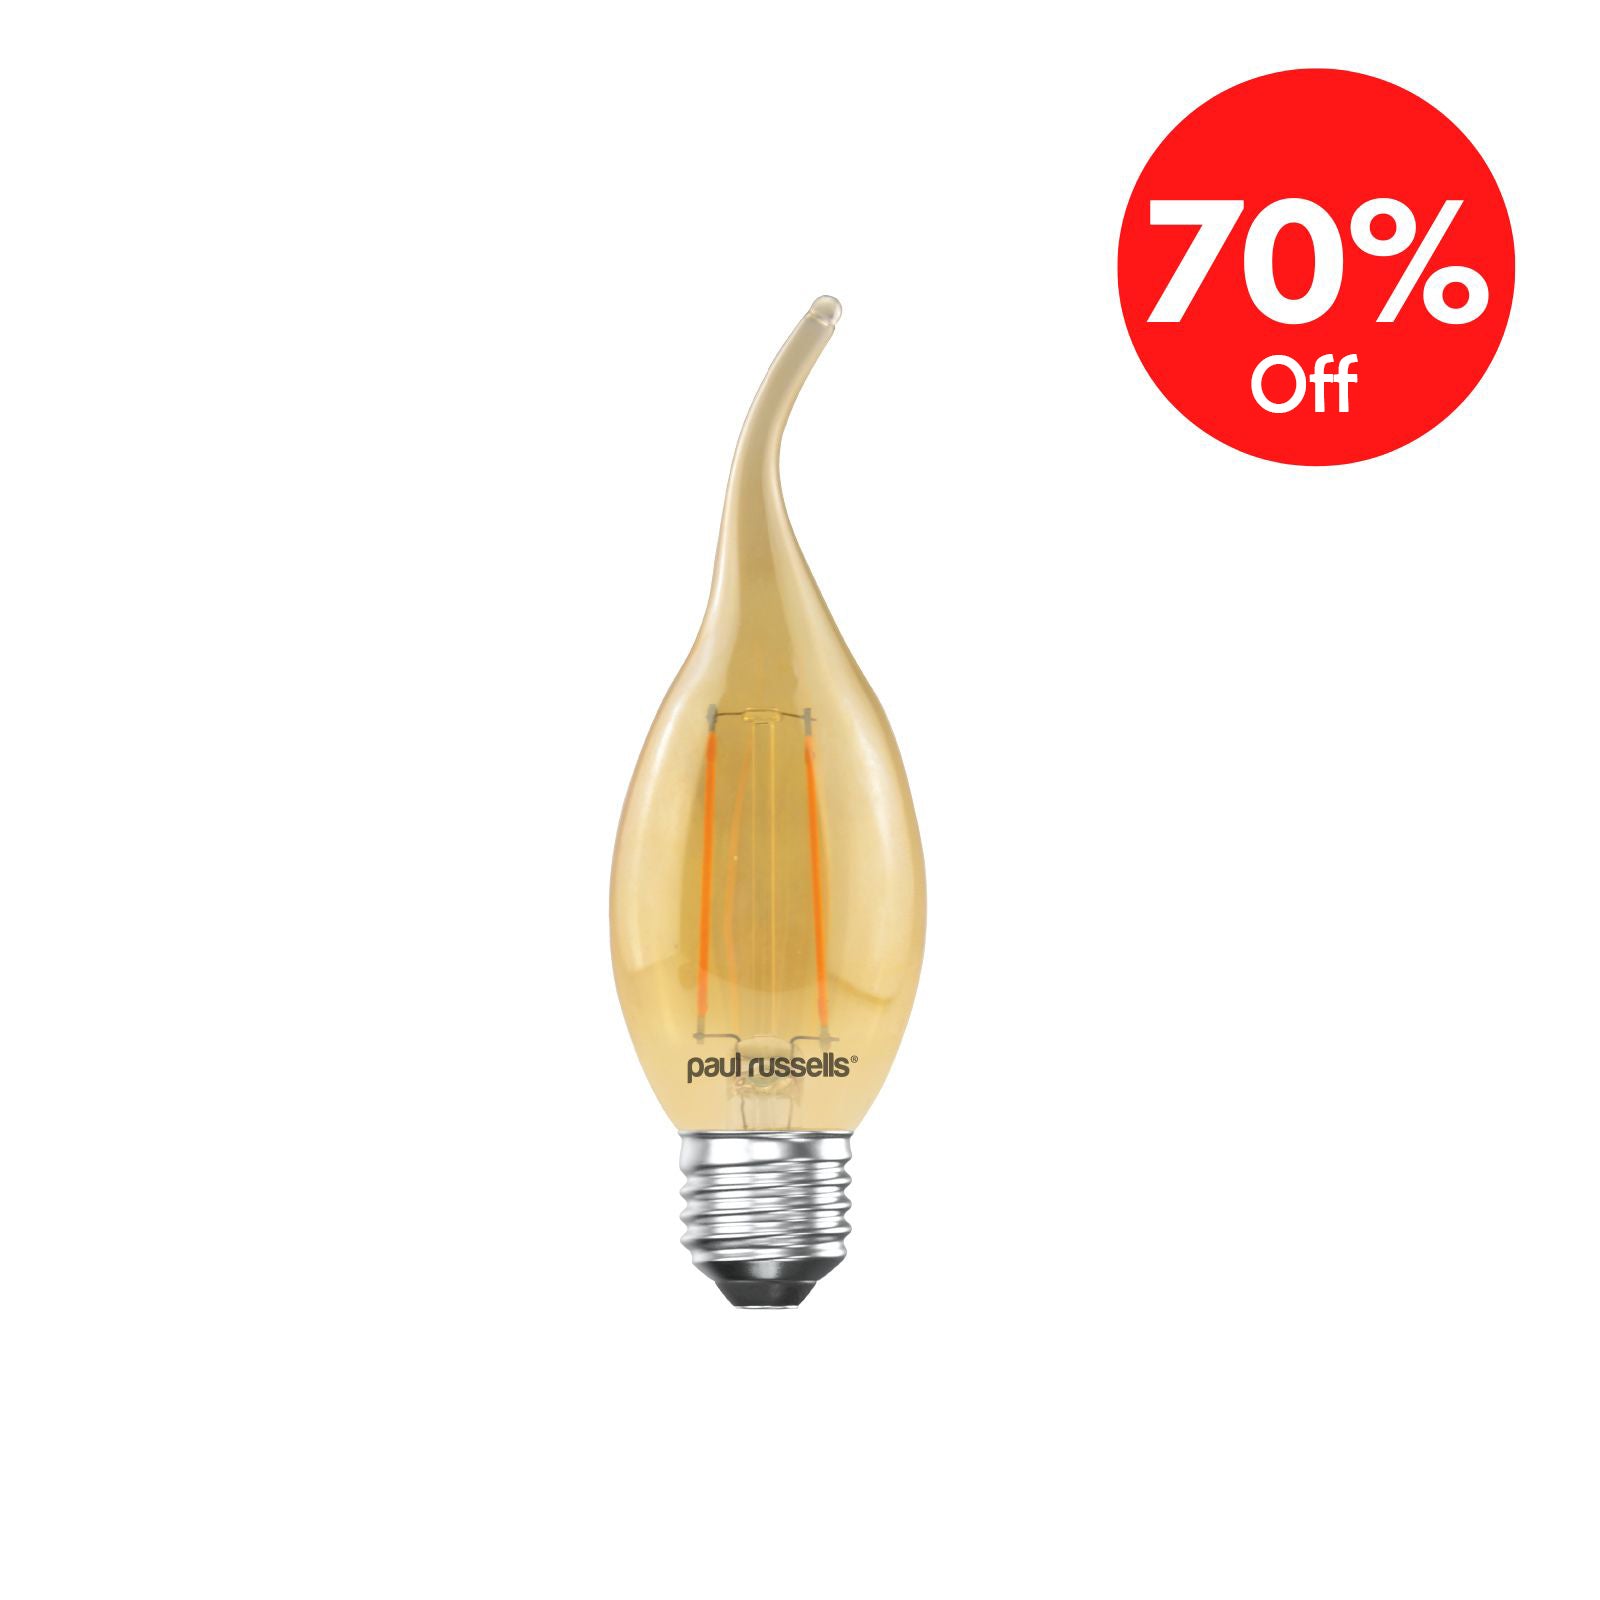 10x Pack LED Filament Bent Tip Candle 2W=25W Extra Warm White ES E27 Edison Screw Amber Bulbs